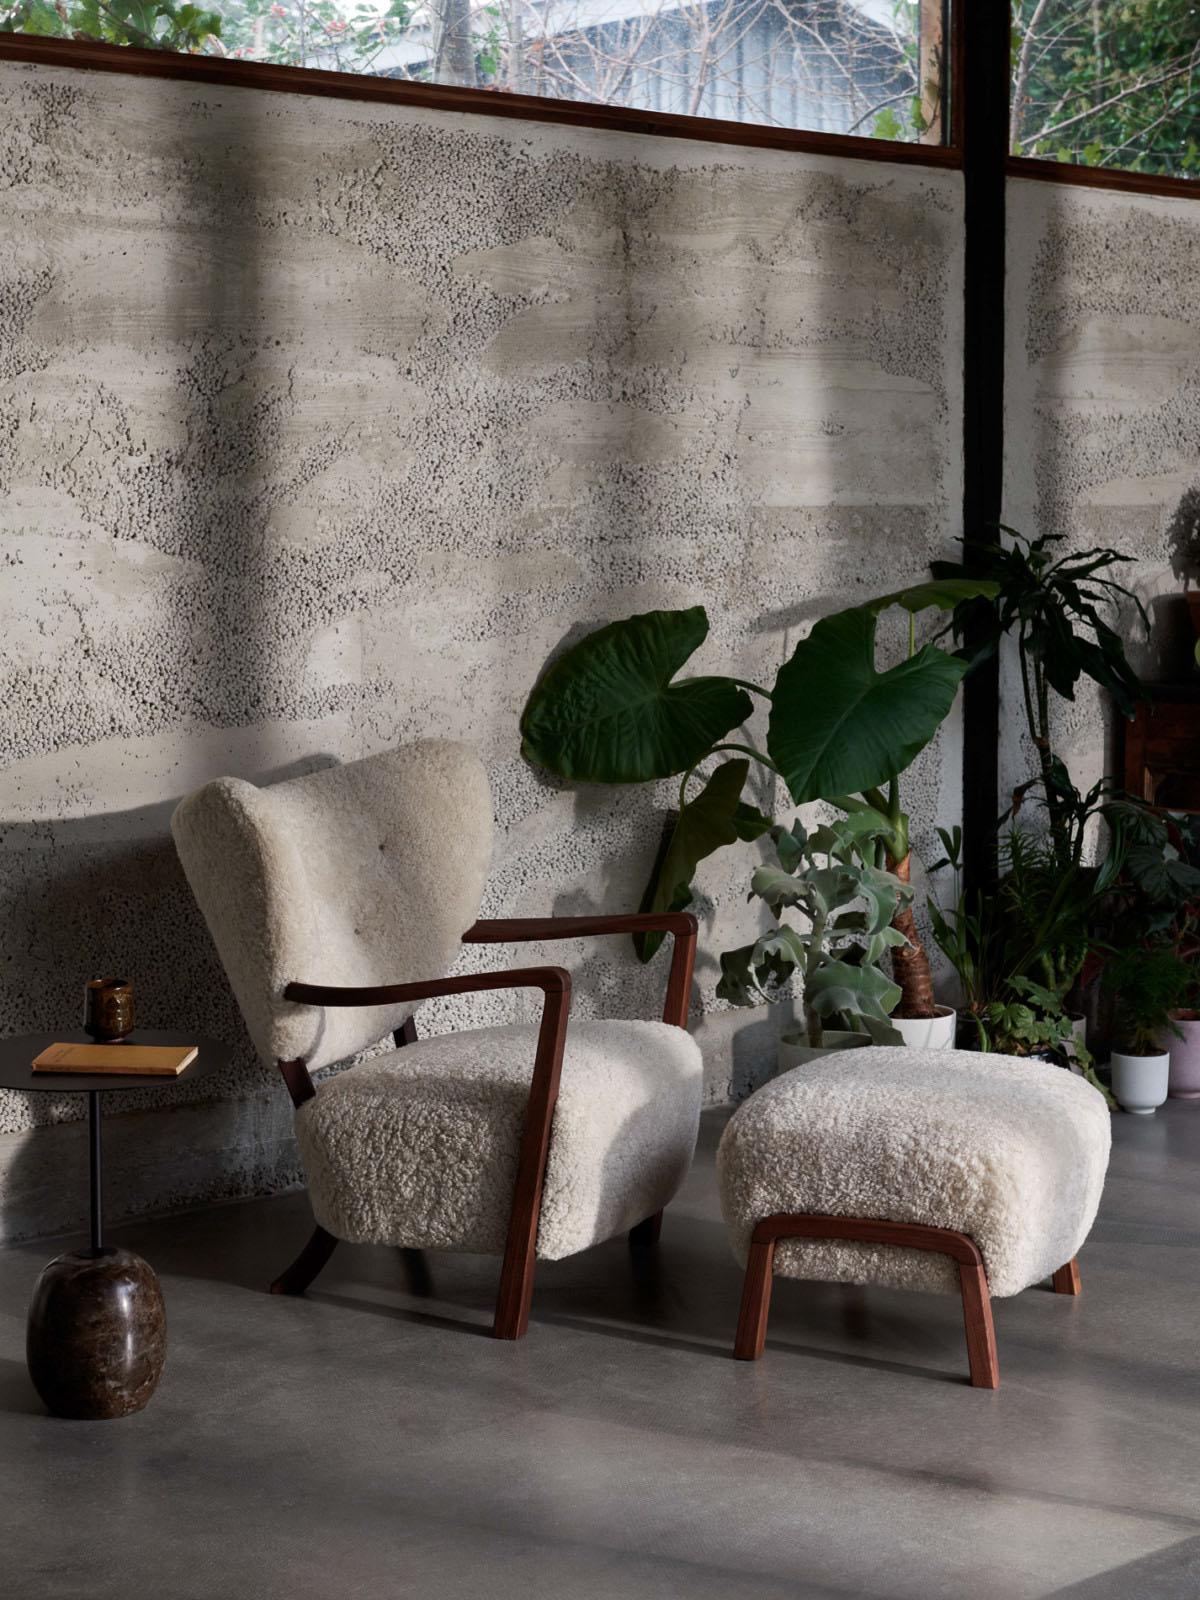 Introducing Wulff, a lounge chair whose upholstered form pays tribute to the hand-crafted designs of the 1930's. First produced in a traditional Danish workshop in the first half of the 20th century by Cabinetmaker Jørgen Wolff, the Wulff lounge